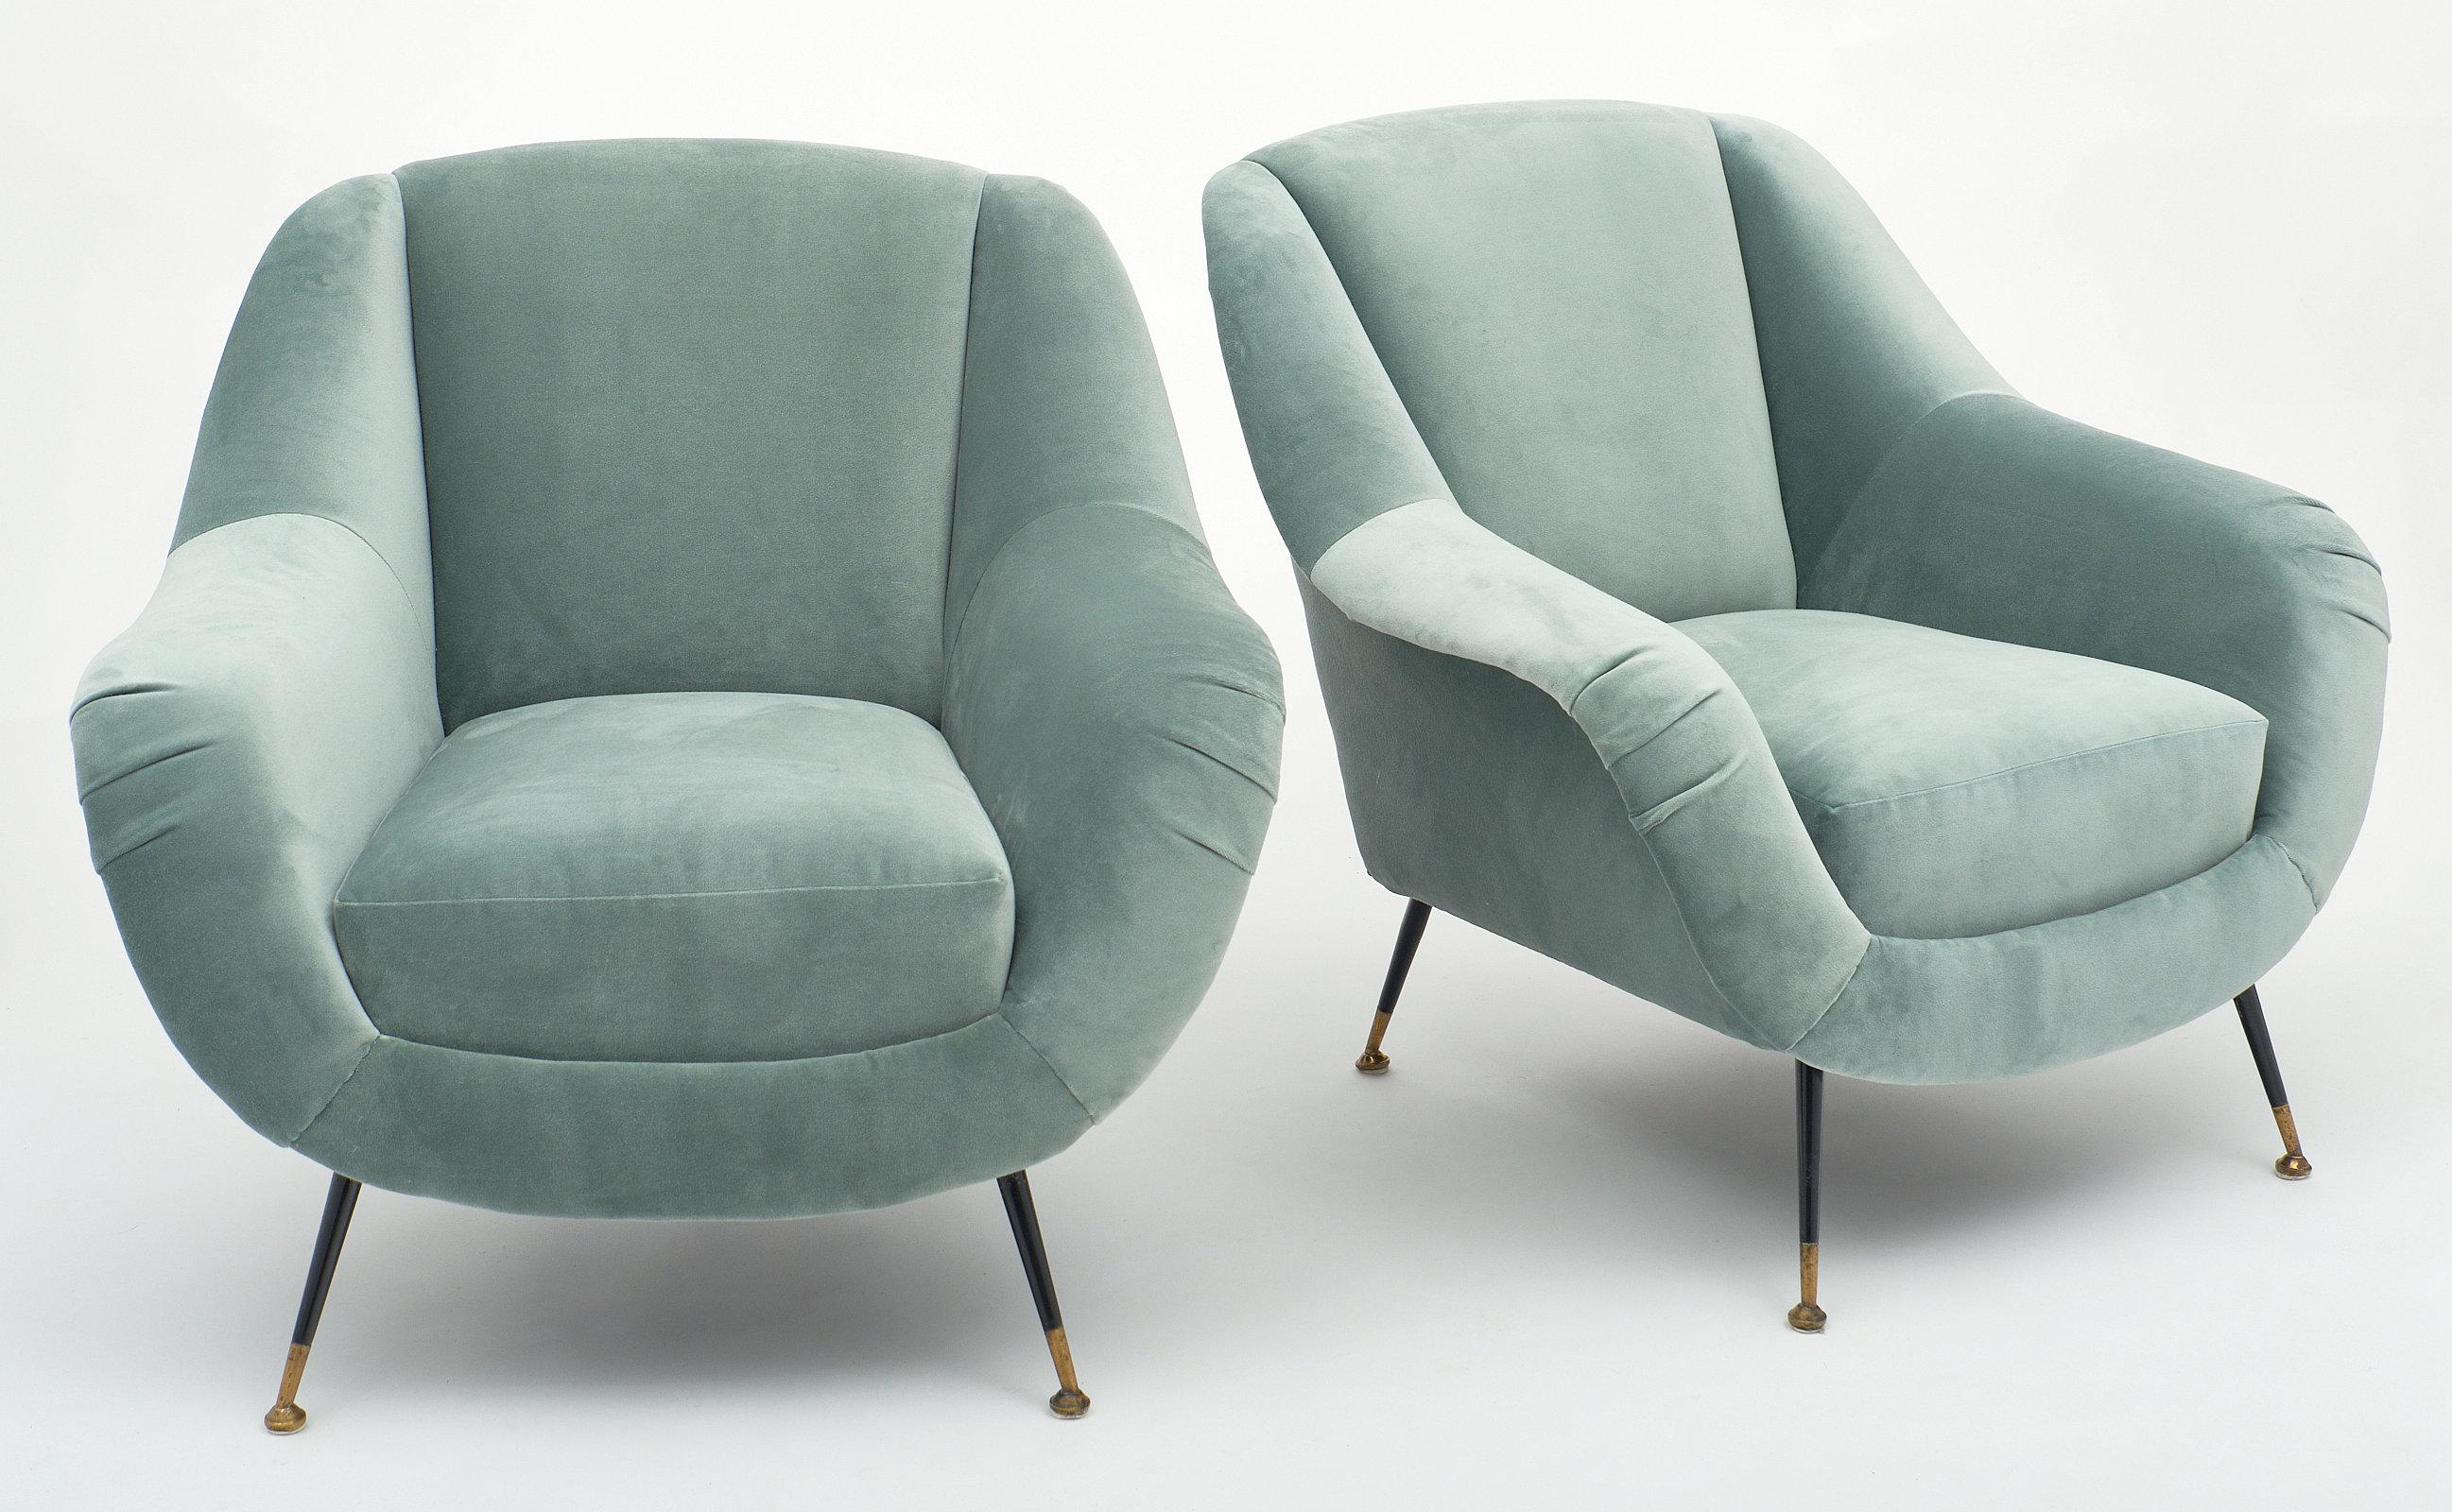 Pair of midcentury armchairs in the style of Carlo di Carli with newly upholstered aqua velvet-cotton blend upholstery. We love the lacquered legs and brass feet. The curved forms are comfortable and striking!